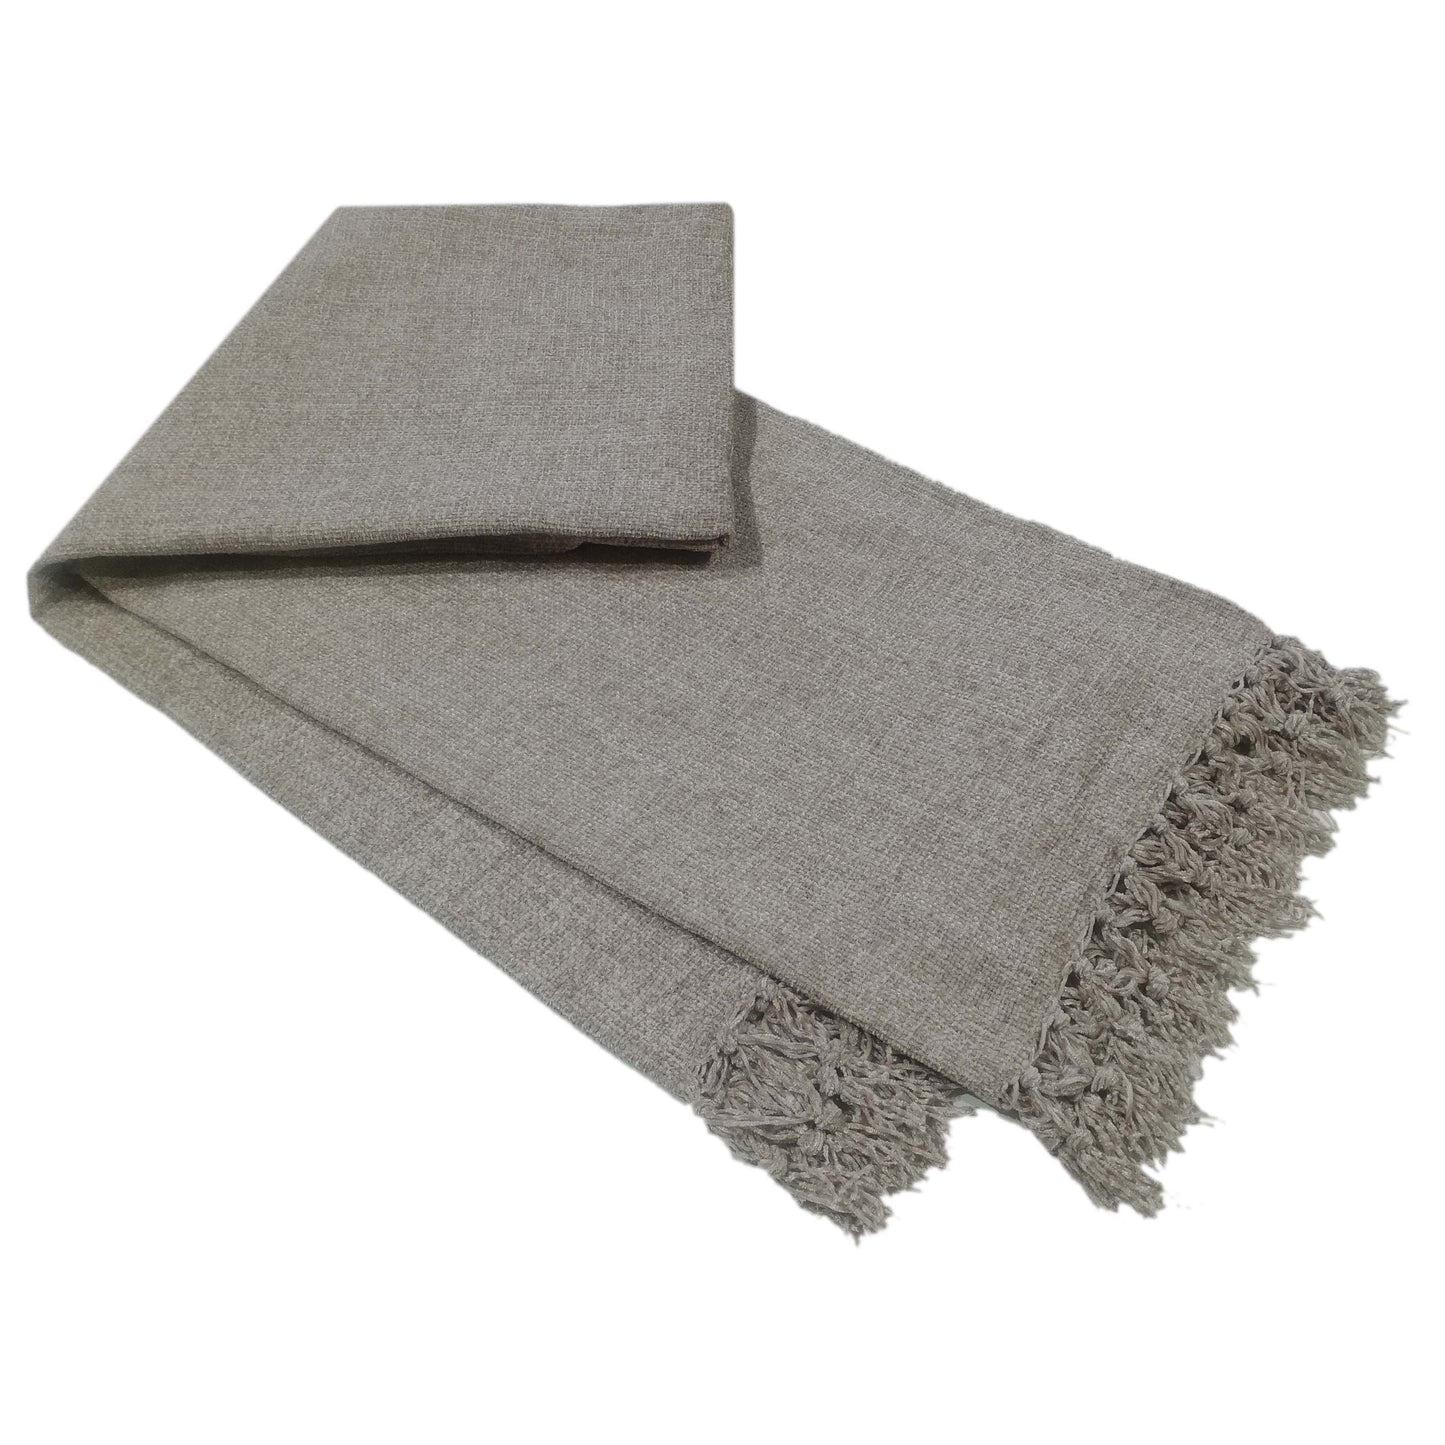 Chenille Throw Blanket with Tassels for Couch Sofa Chair Bed Home Decoration SILVER / 130 x 170 cm OLIVIA ROCCO Throw